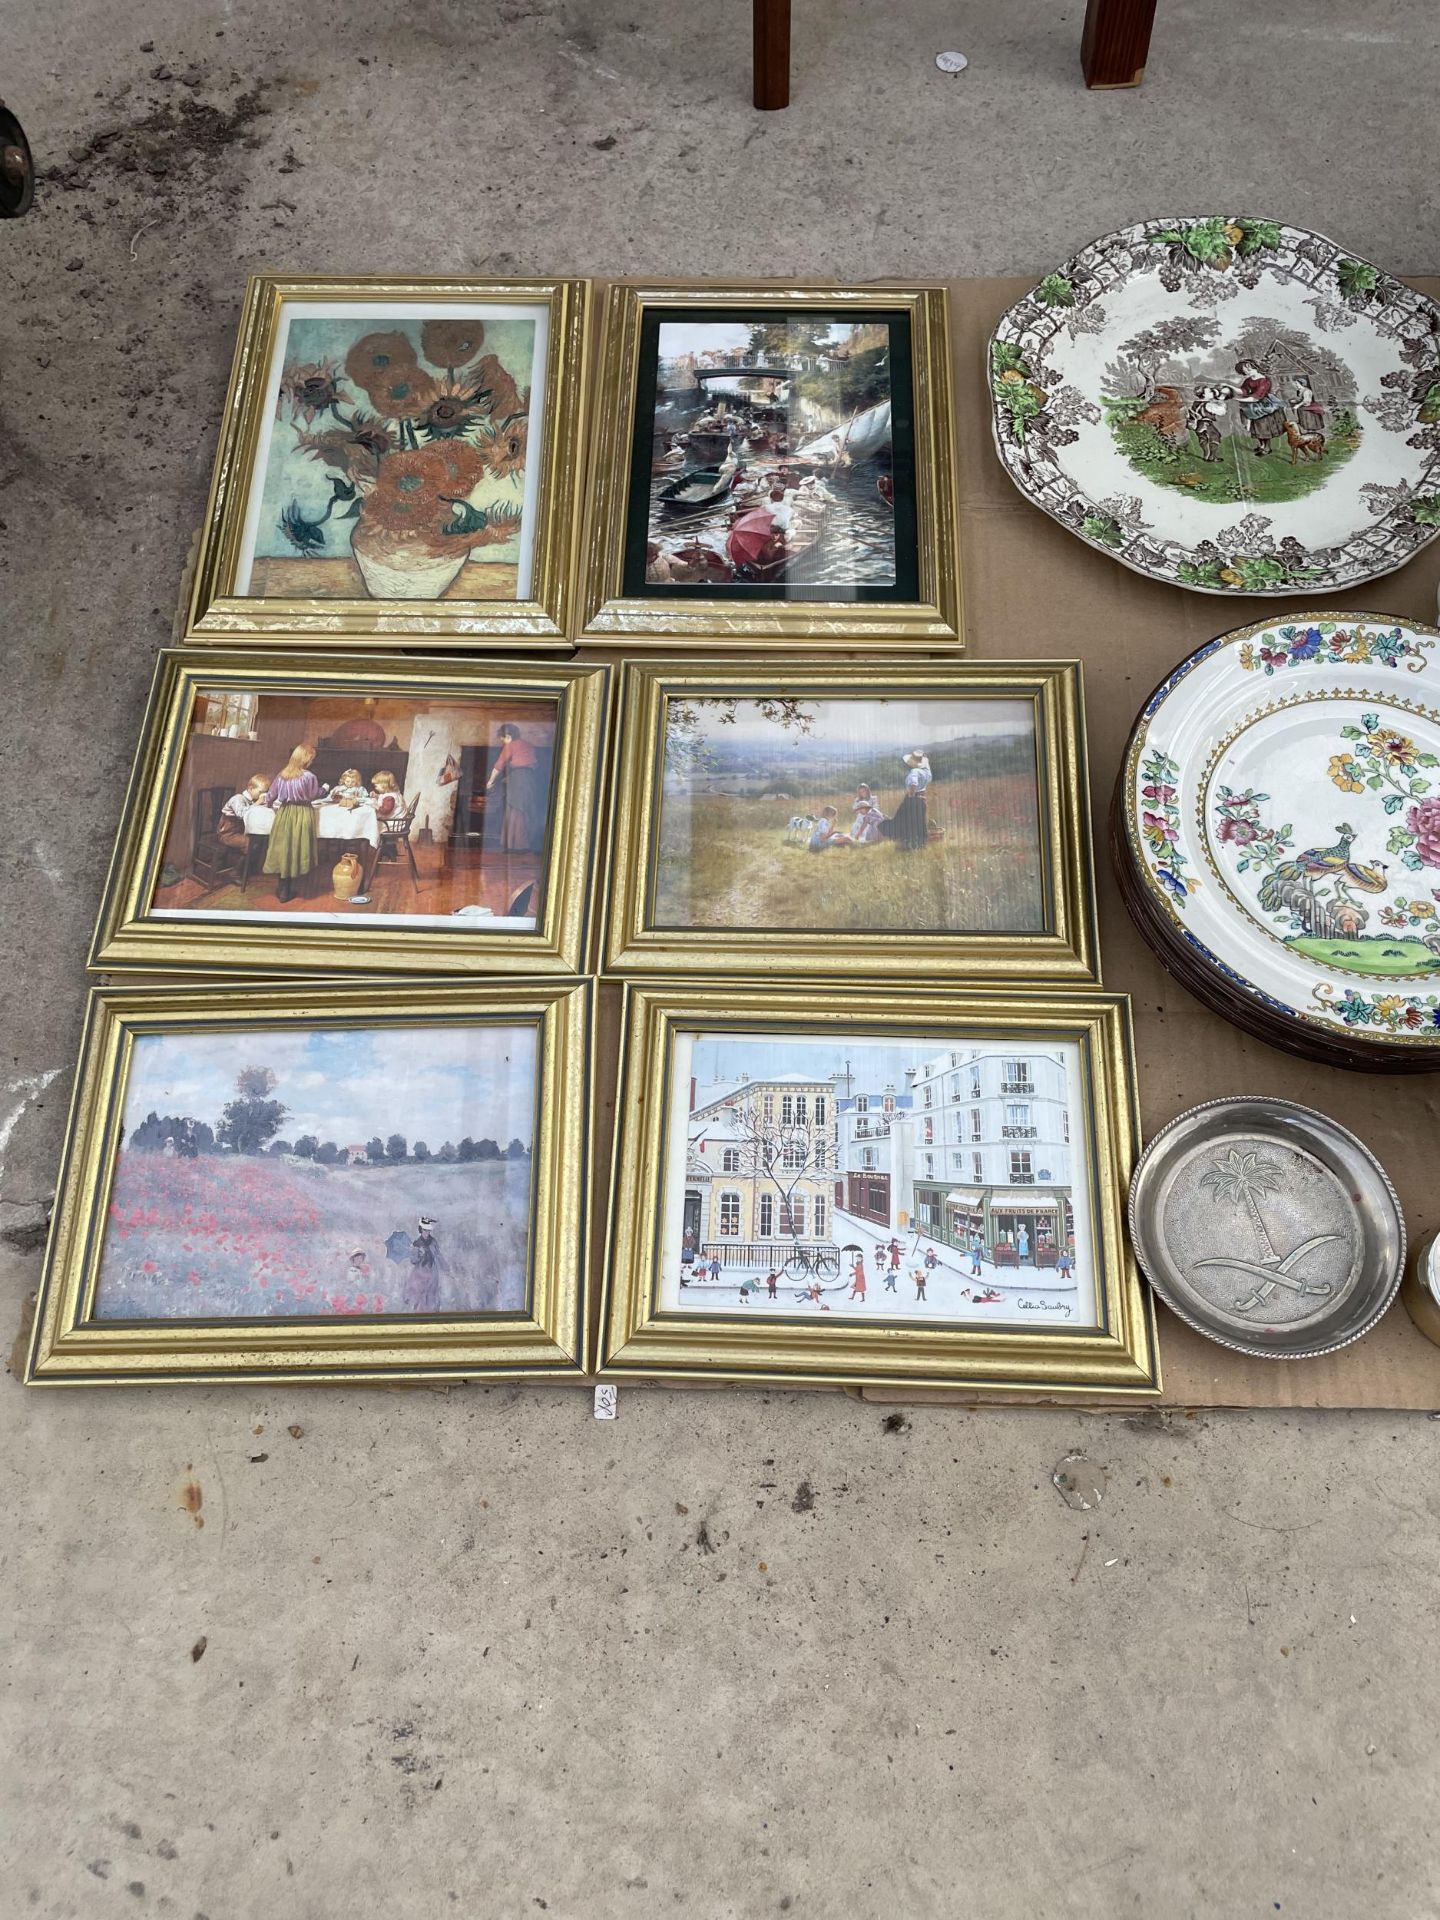 A LARGE ASSORTMENT OF ITEMS TO INCLUDE ORIENTAL STYLE BOWLS, A BRASS CANON AND FRAMED PRINTS ETC - Image 5 of 5